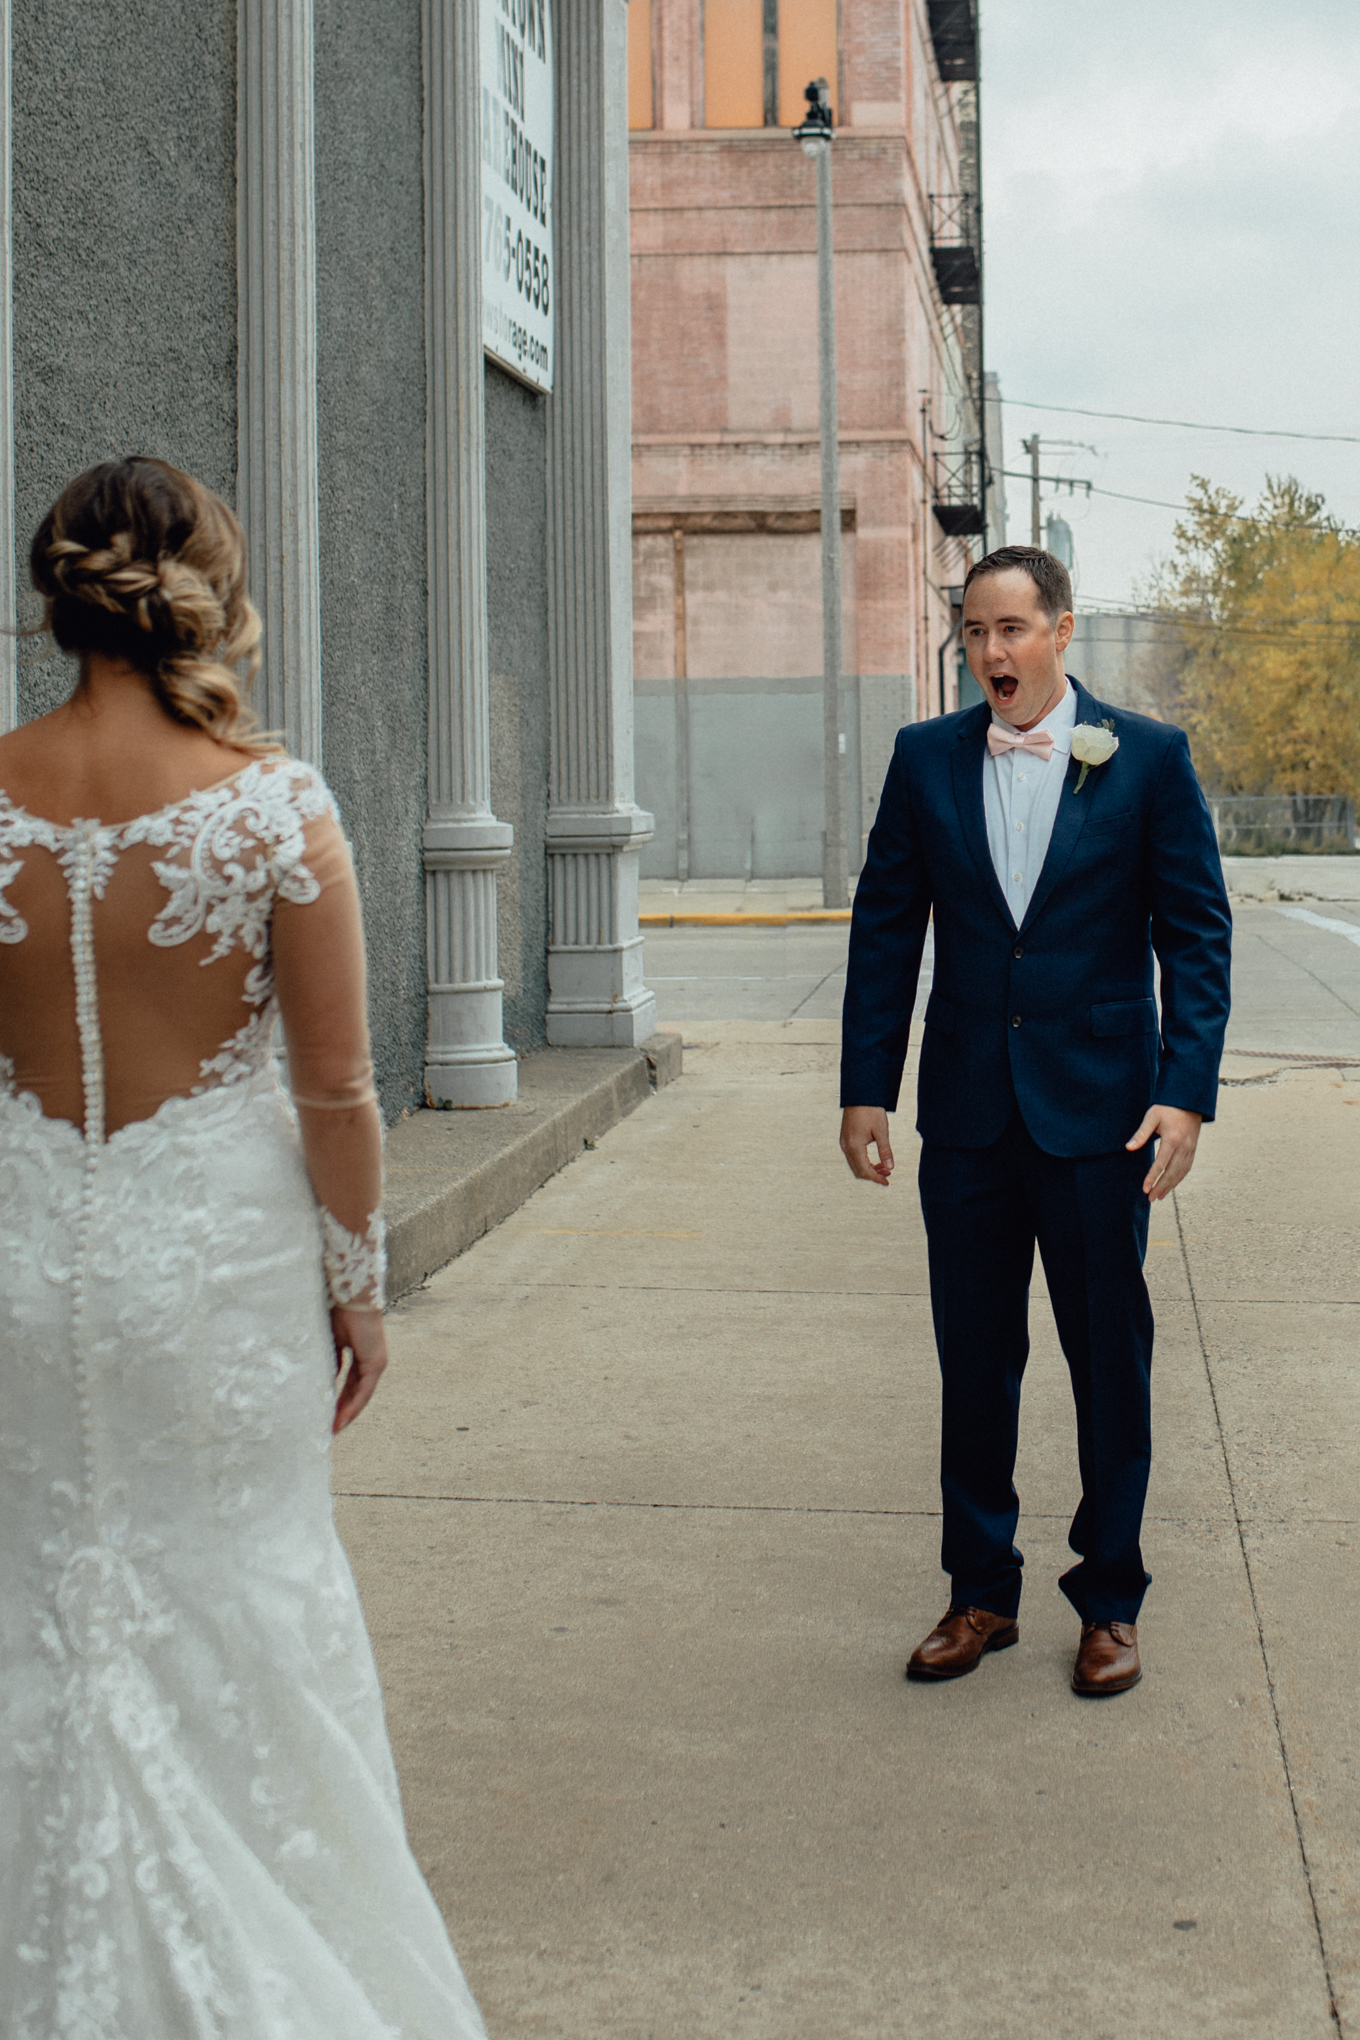 man and women on street sharing first look before wedding